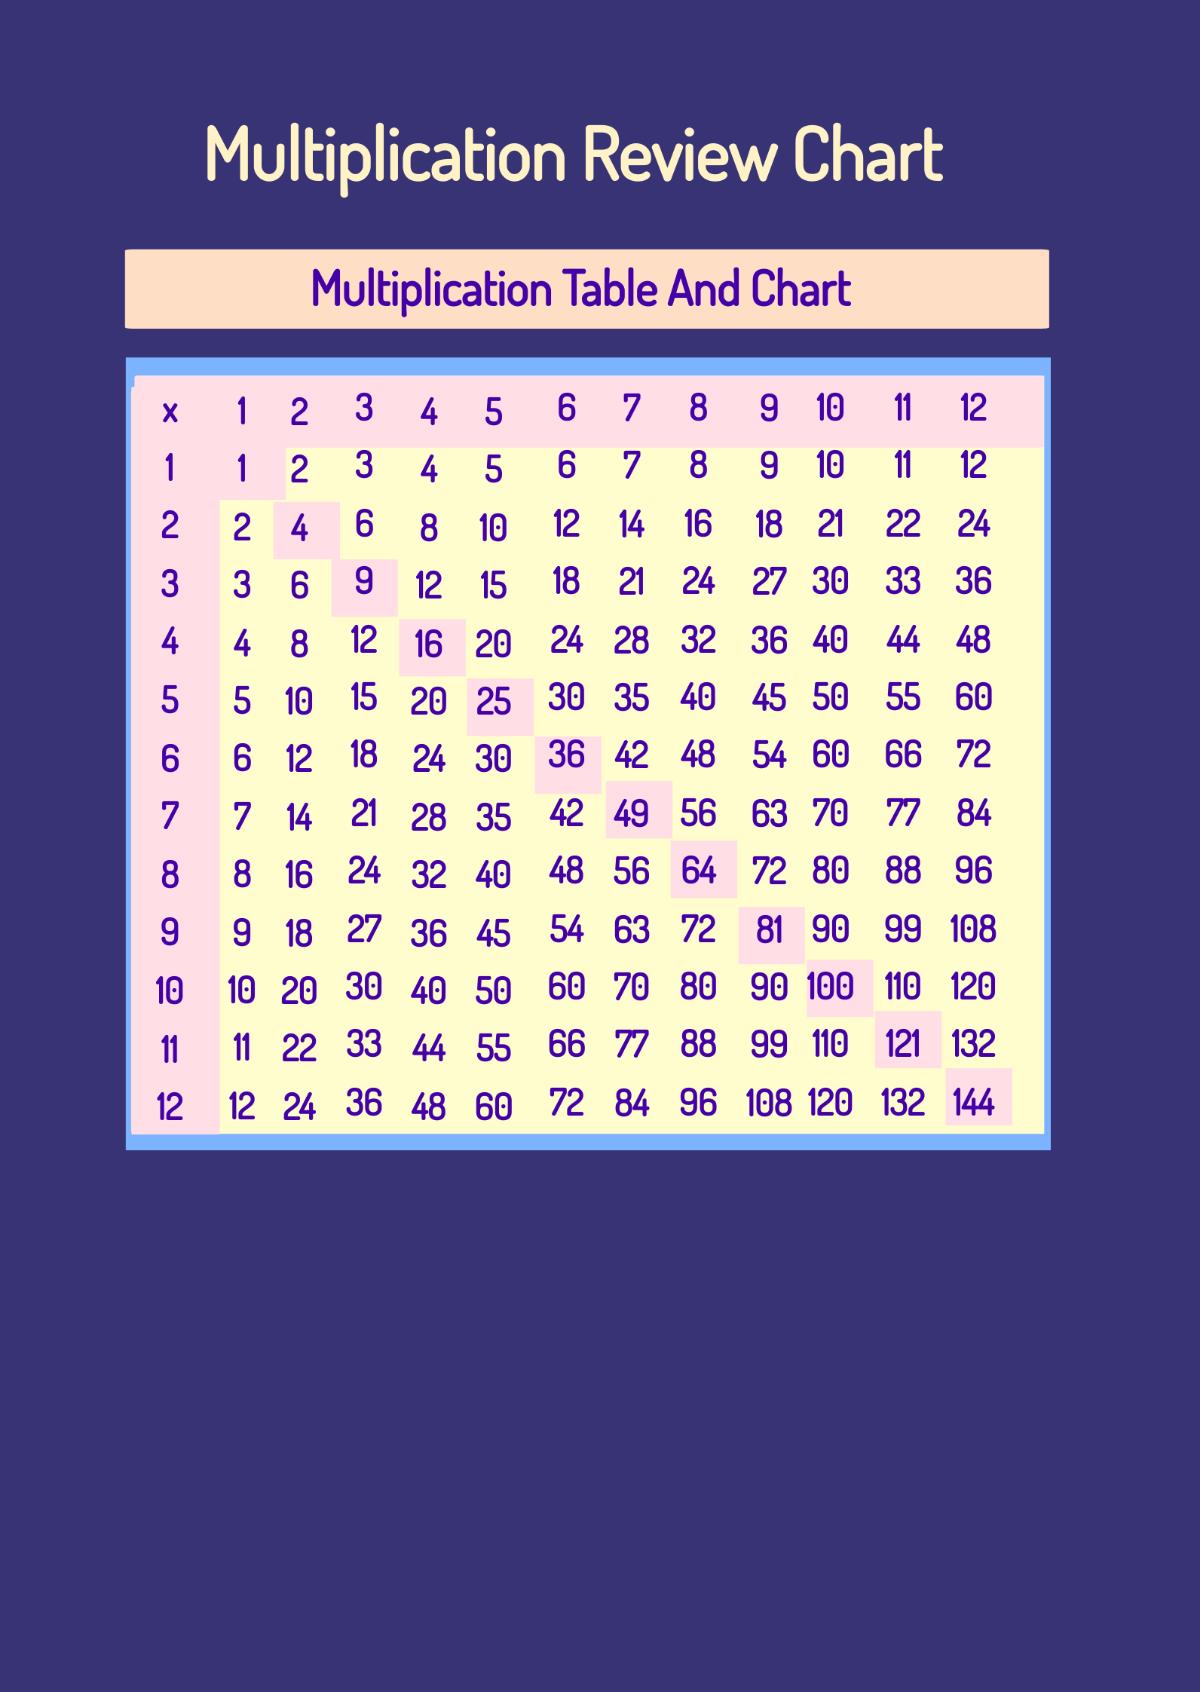 Multiplication Review Chart Template